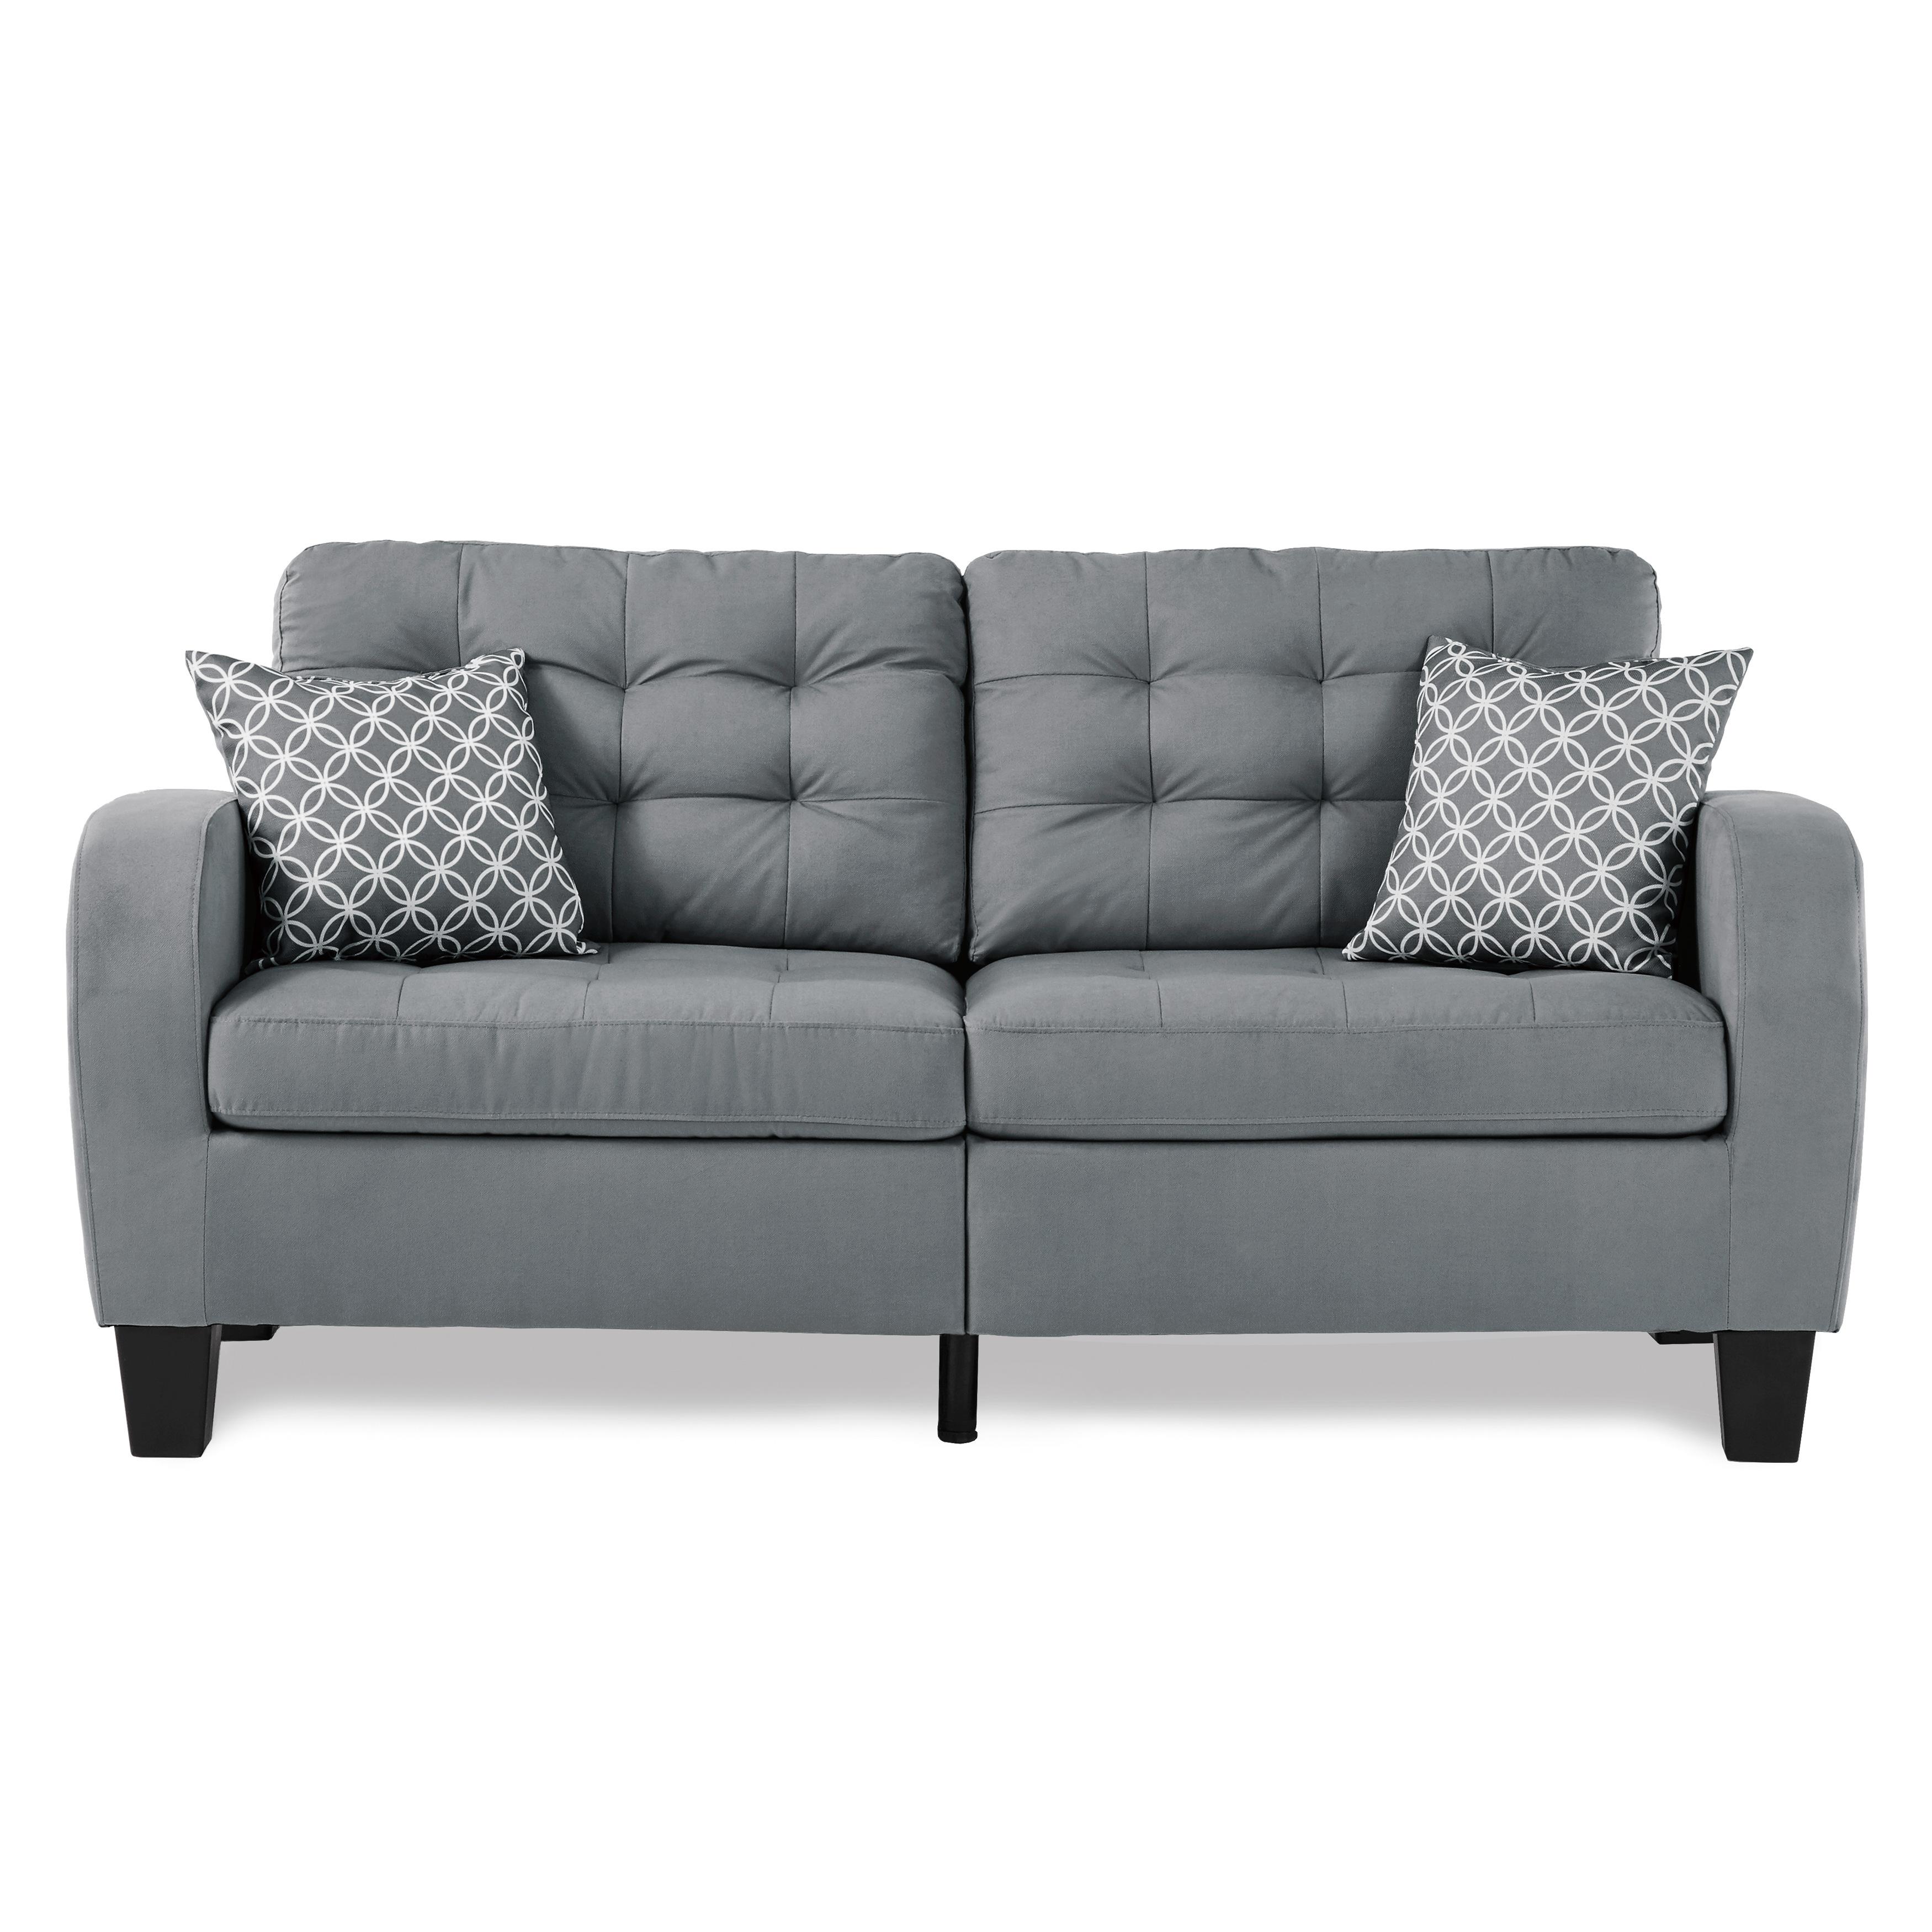 Classic Sofa 8202GRY-3 Sinclair 8202GRY-3 in Gray 